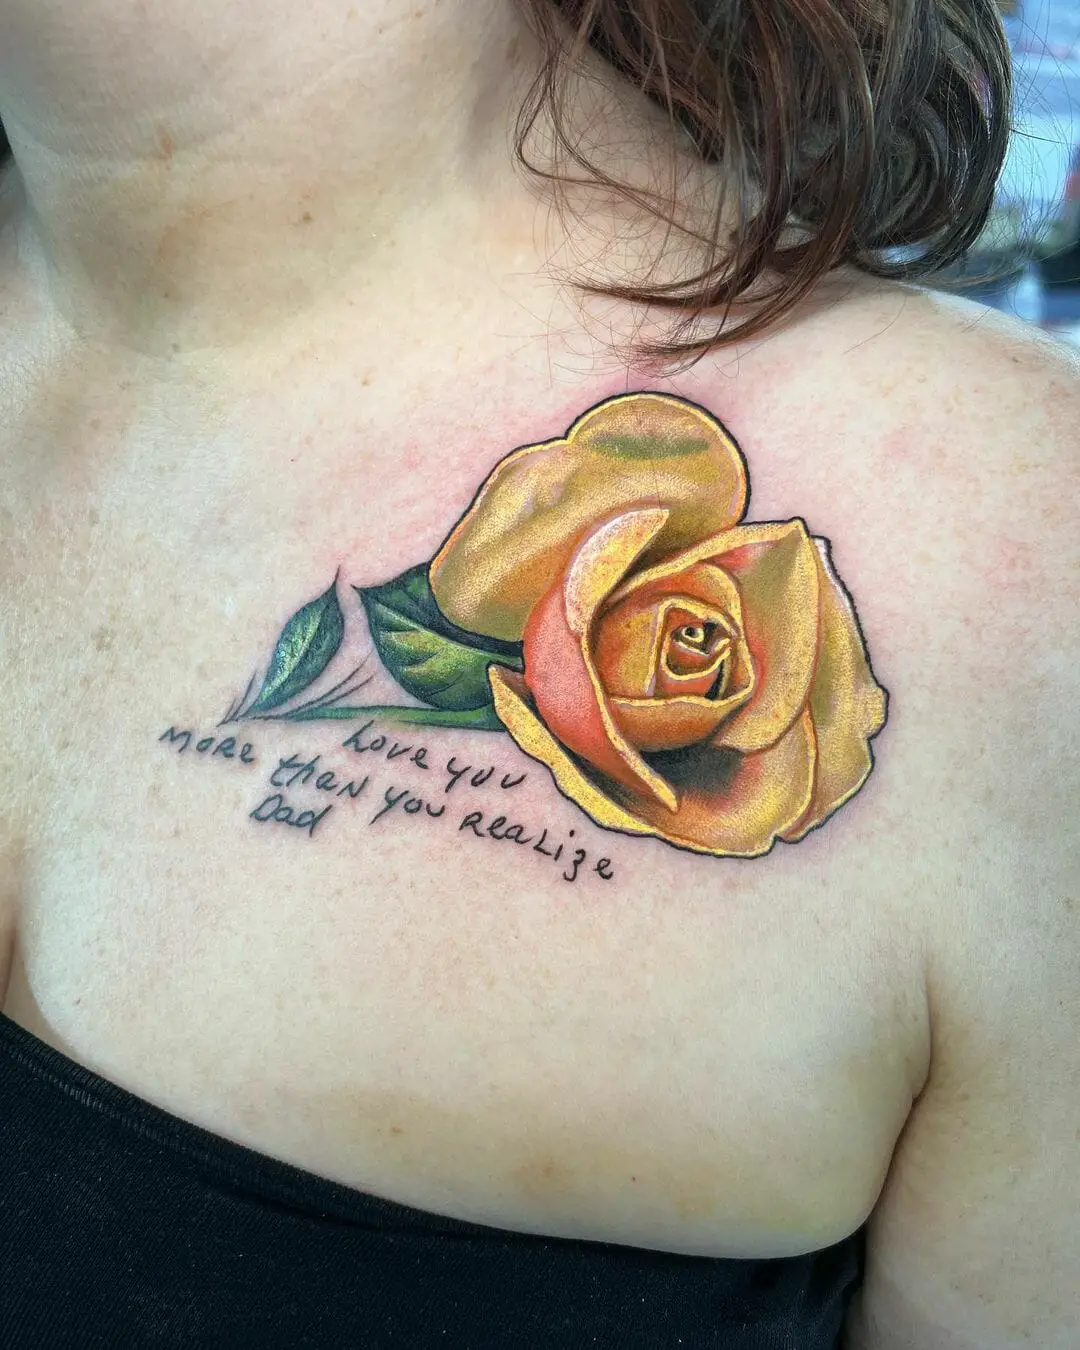 76 Amazing and Glorious Rose Tattoos Ideas and Design for Chest